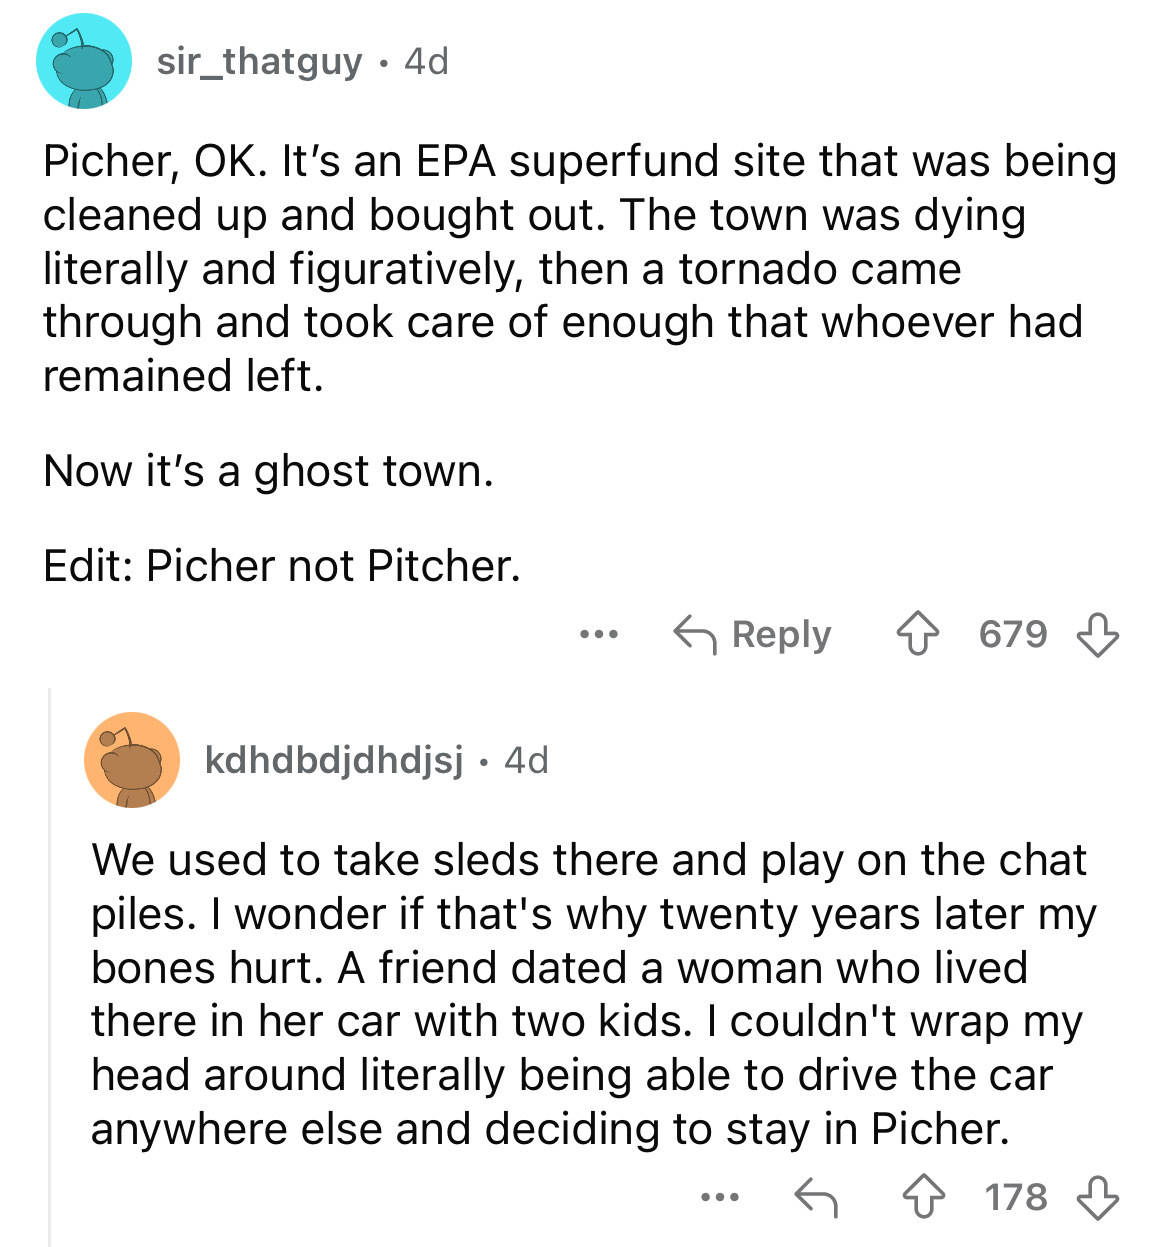 screenshot - sir_thatguy 4d Picher, Ok. It's an Epa superfund site that was being cleaned up and bought out. The town was dying literally and figuratively, then a tornado came through and took care of enough that whoever had remained left. Now it's a ghos